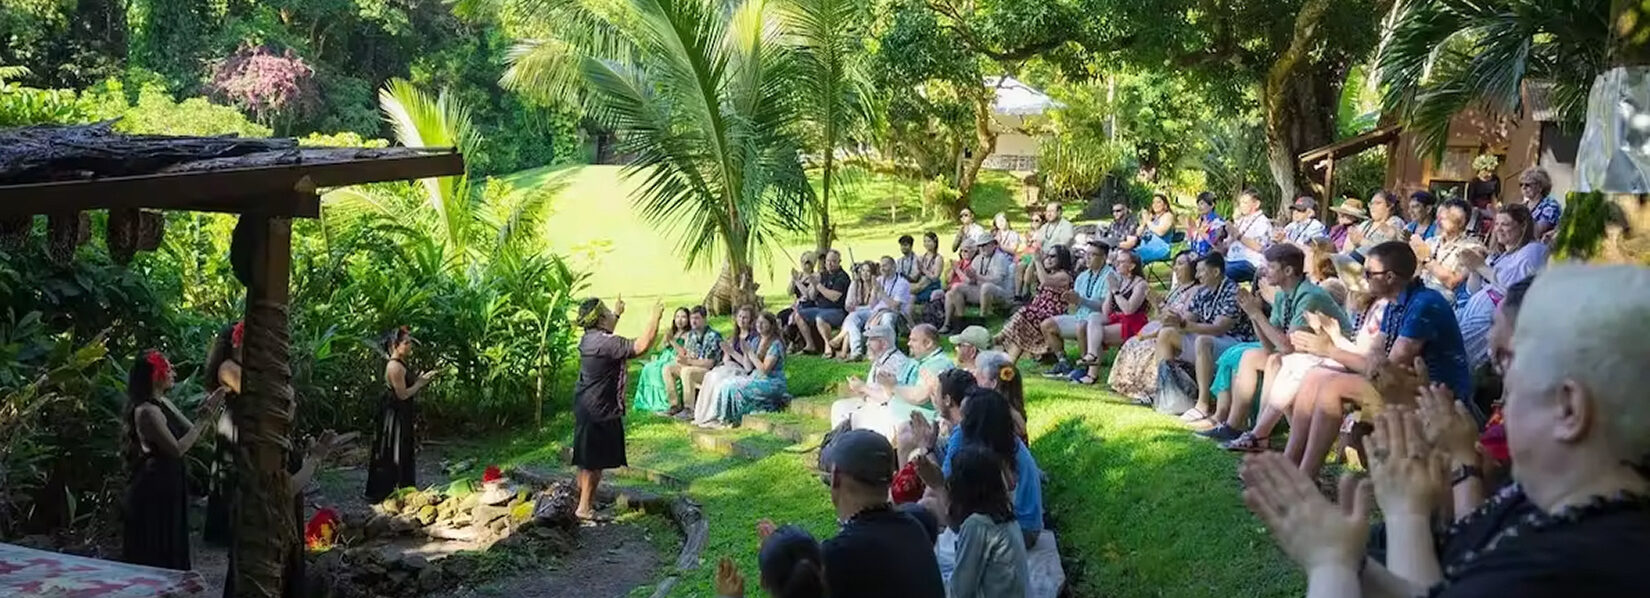 Guests are seated for a cultural demonstration at Nutridge Luau on Oahu.